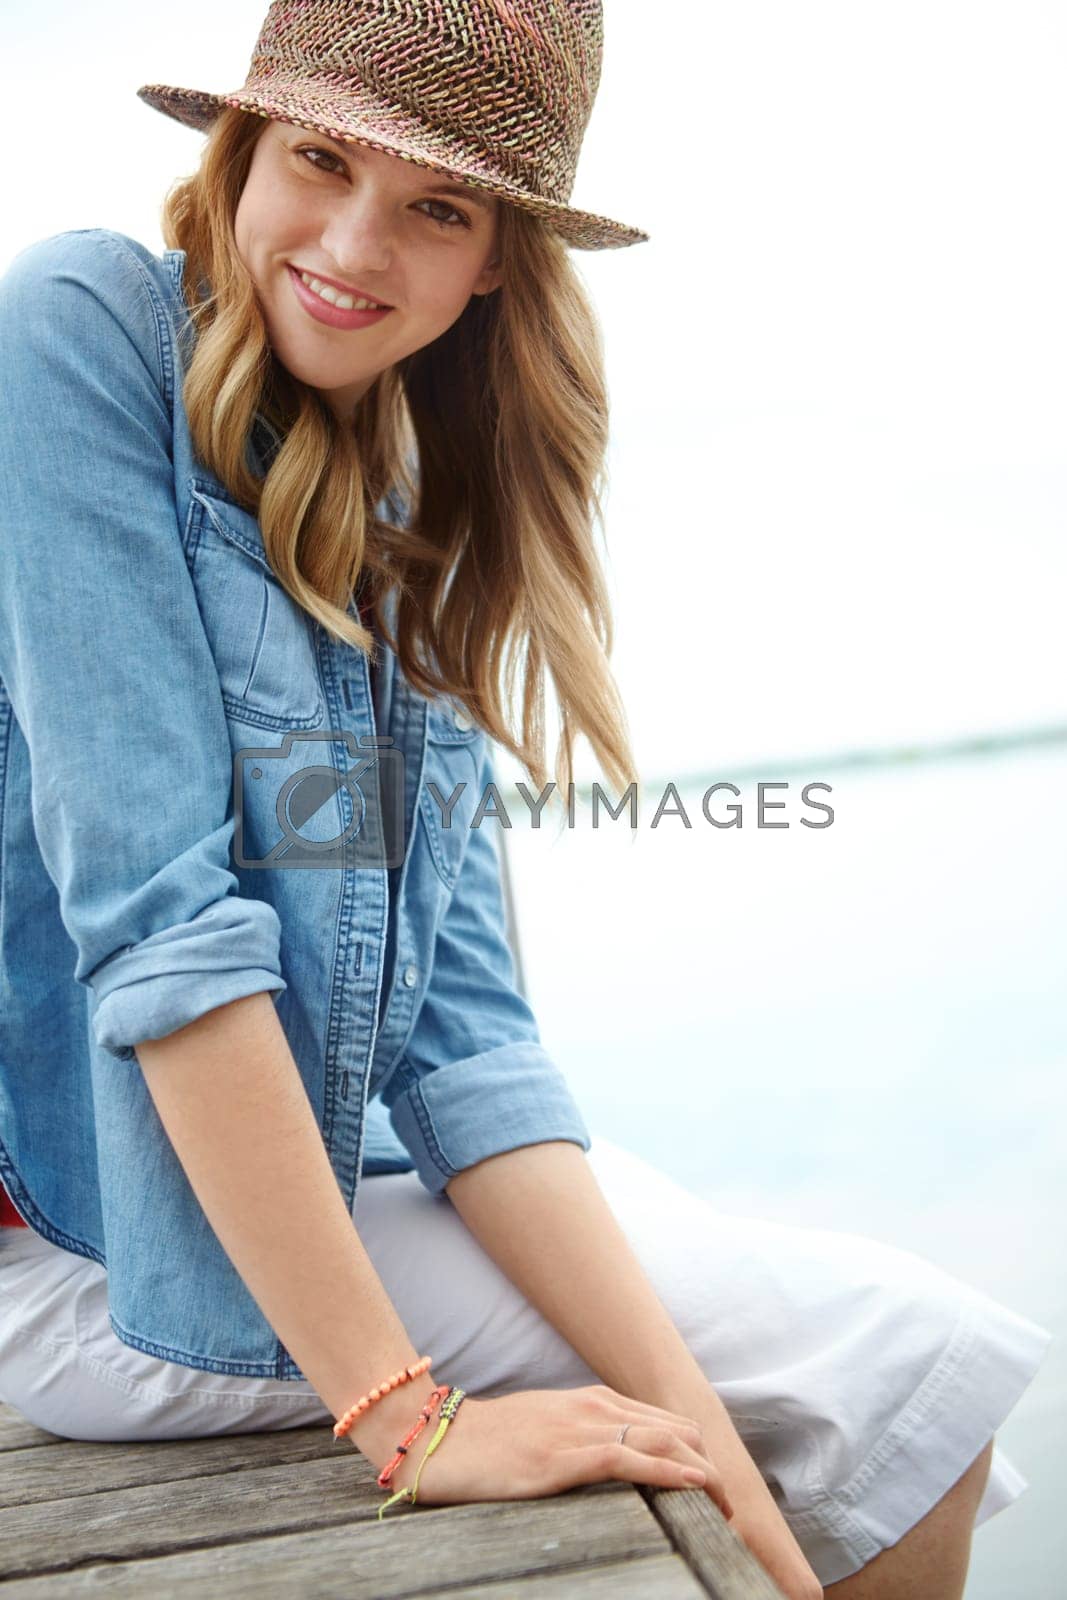 Royalty free image of Tranquility by the lake. A happy young woman sitting on a jetty next to a lake. by YuriArcurs